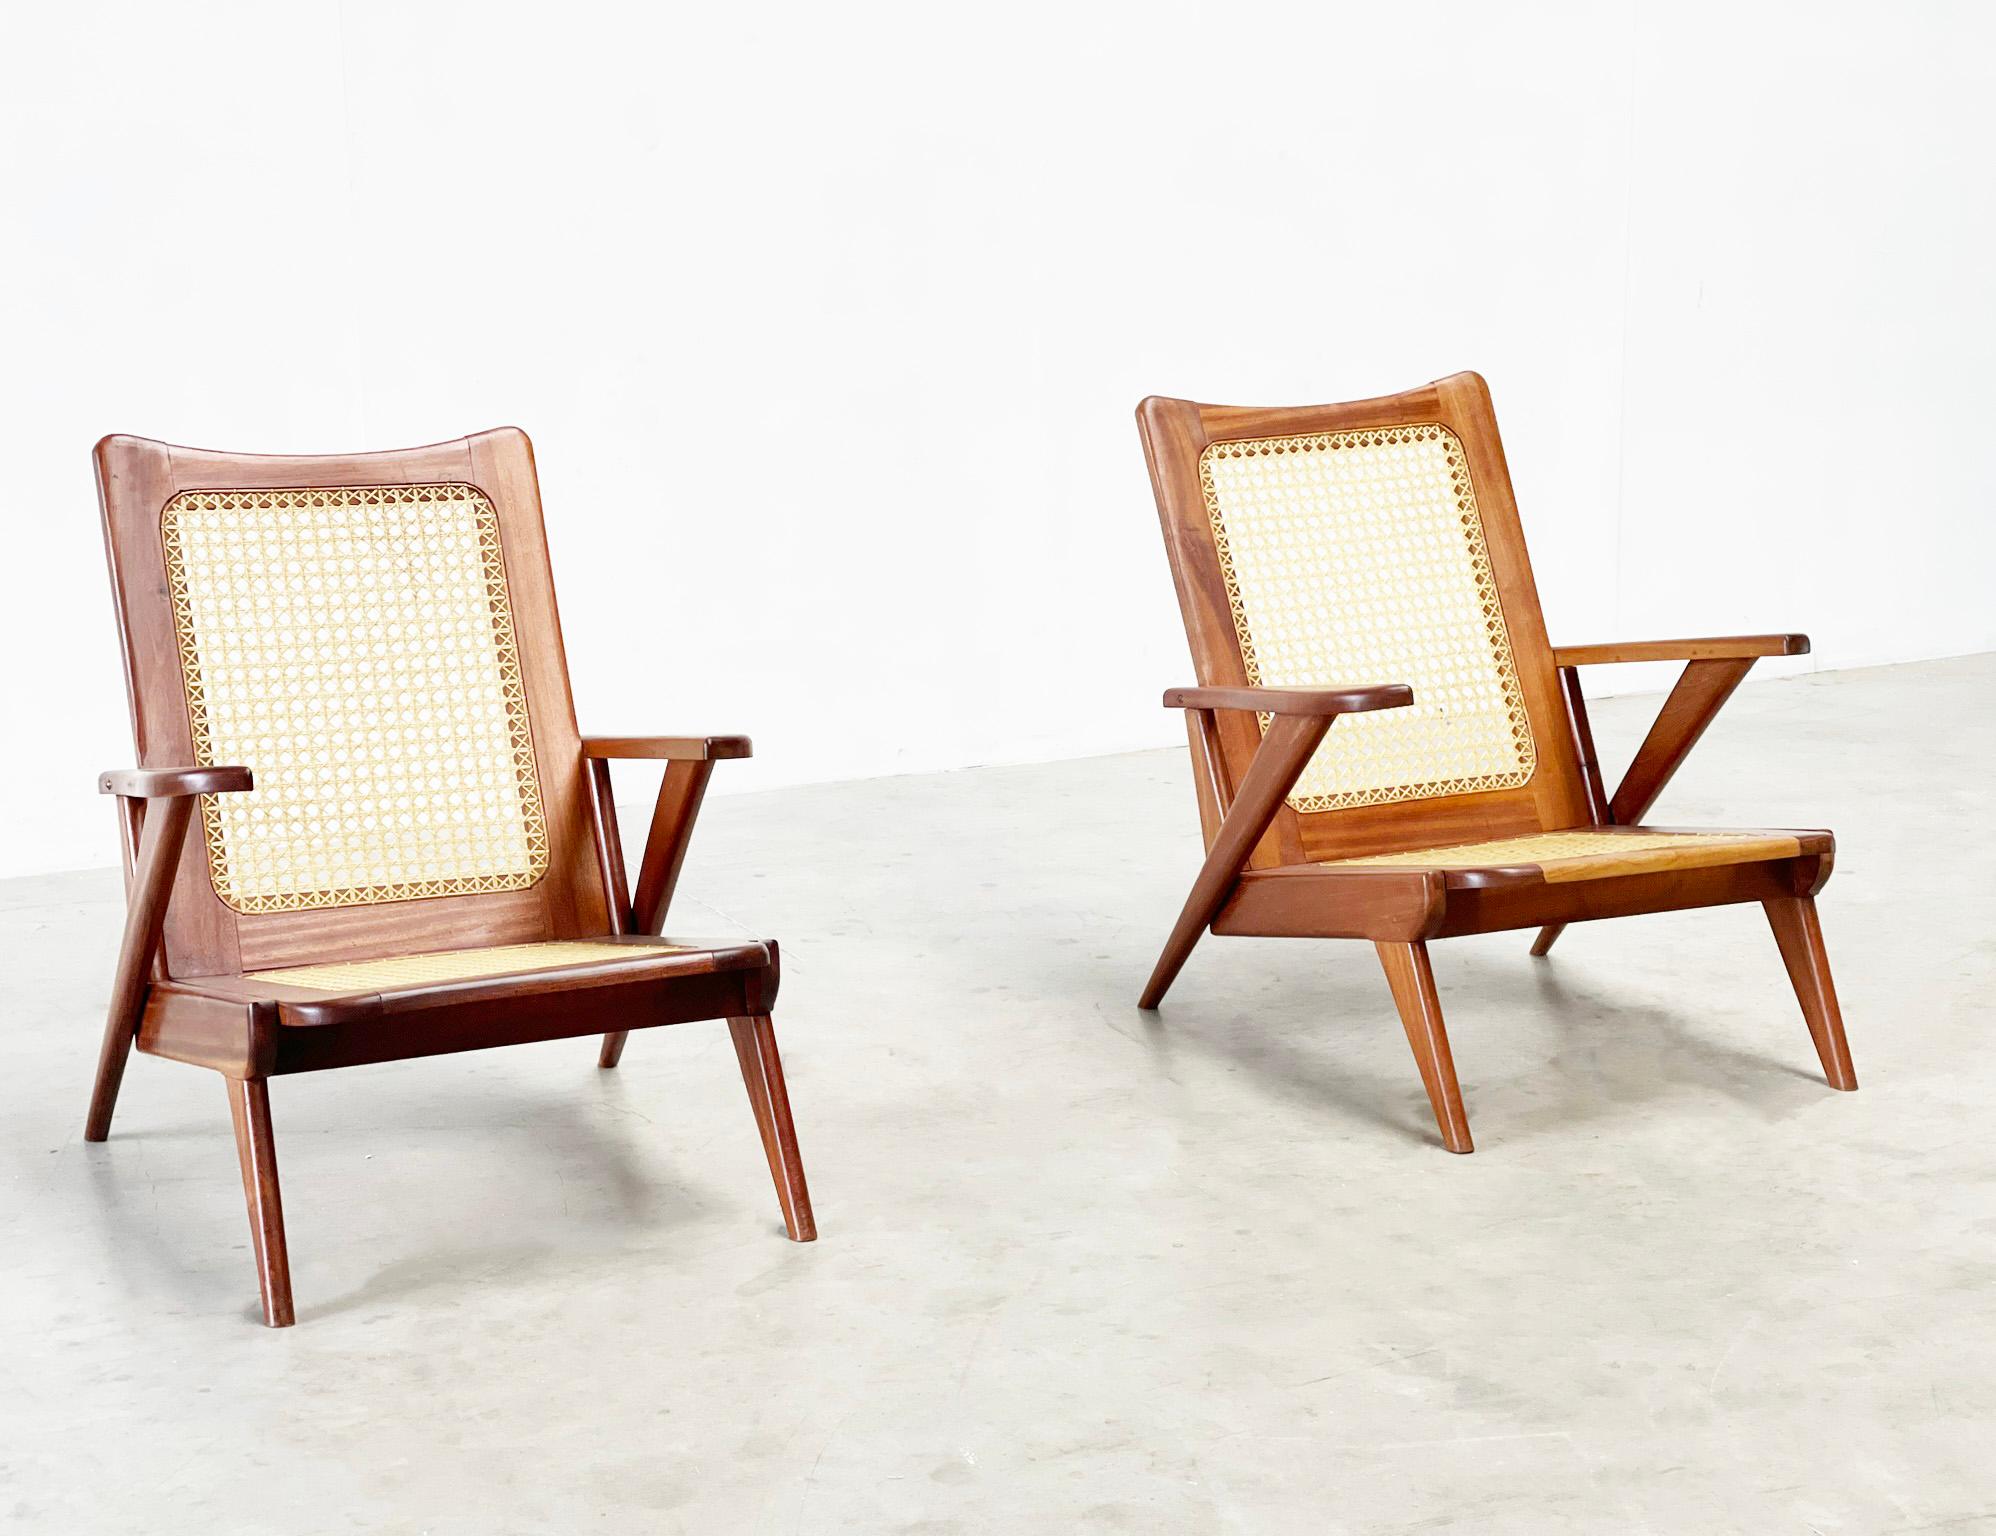 What fantastic chairs. These chairs are from the 1950s from France. The chairs remind us very much of Michel Ducaroy's lounge chairs from SNA Roset. 

 

Unfortunately, we are not sure about this yet. We are still searching in old archives to see if